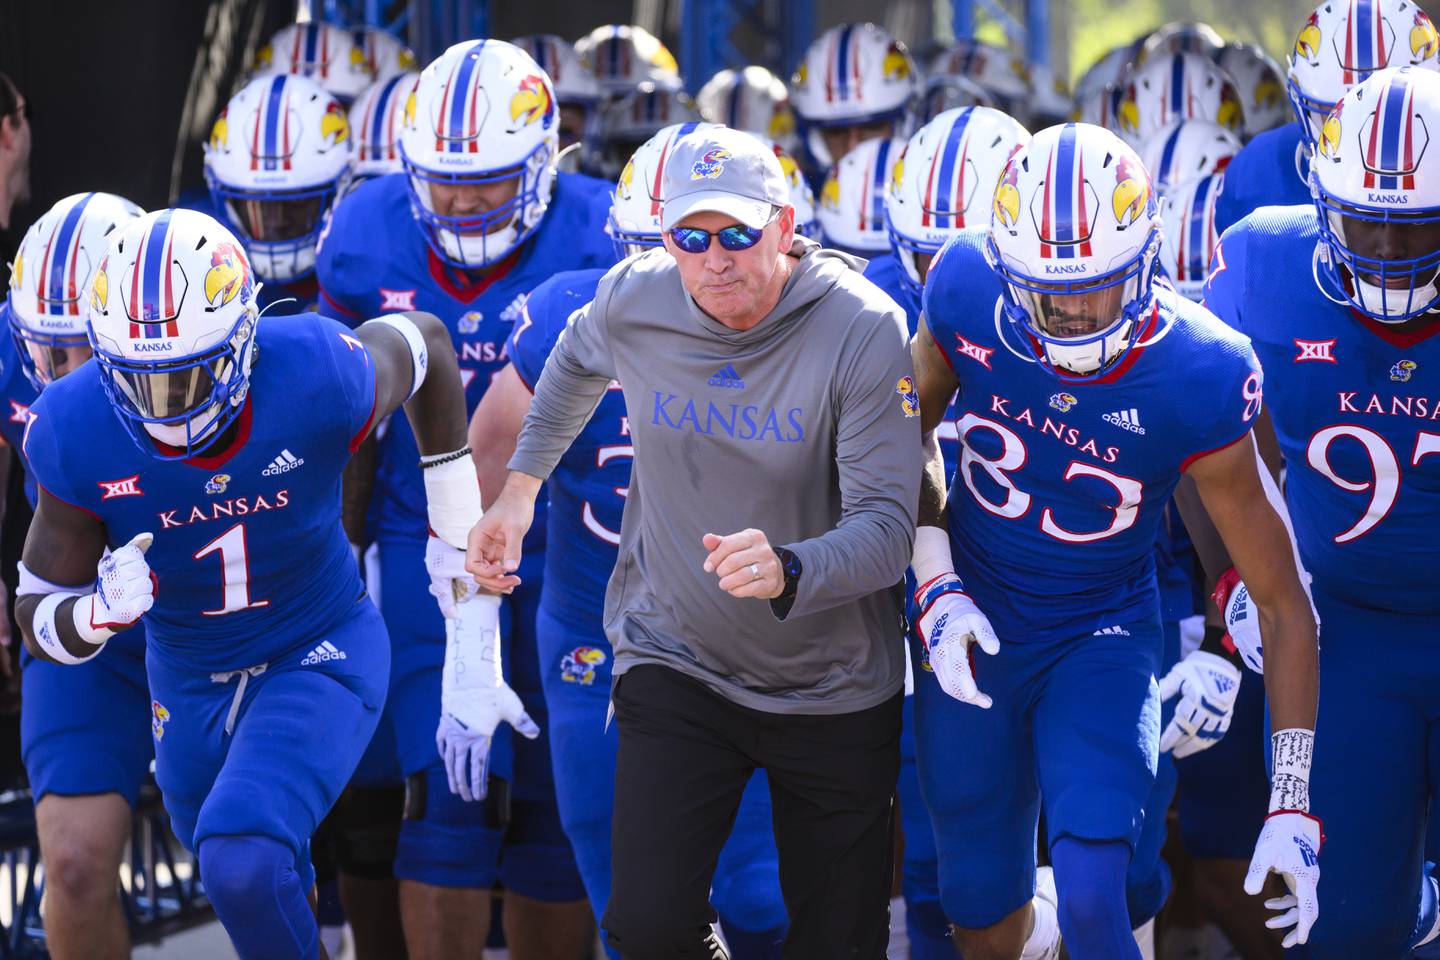 Kansas coach Lance Leipold enters the field with his team before a game against Iowa State on Oct. 1, 2022, in Lawrence, Kan.